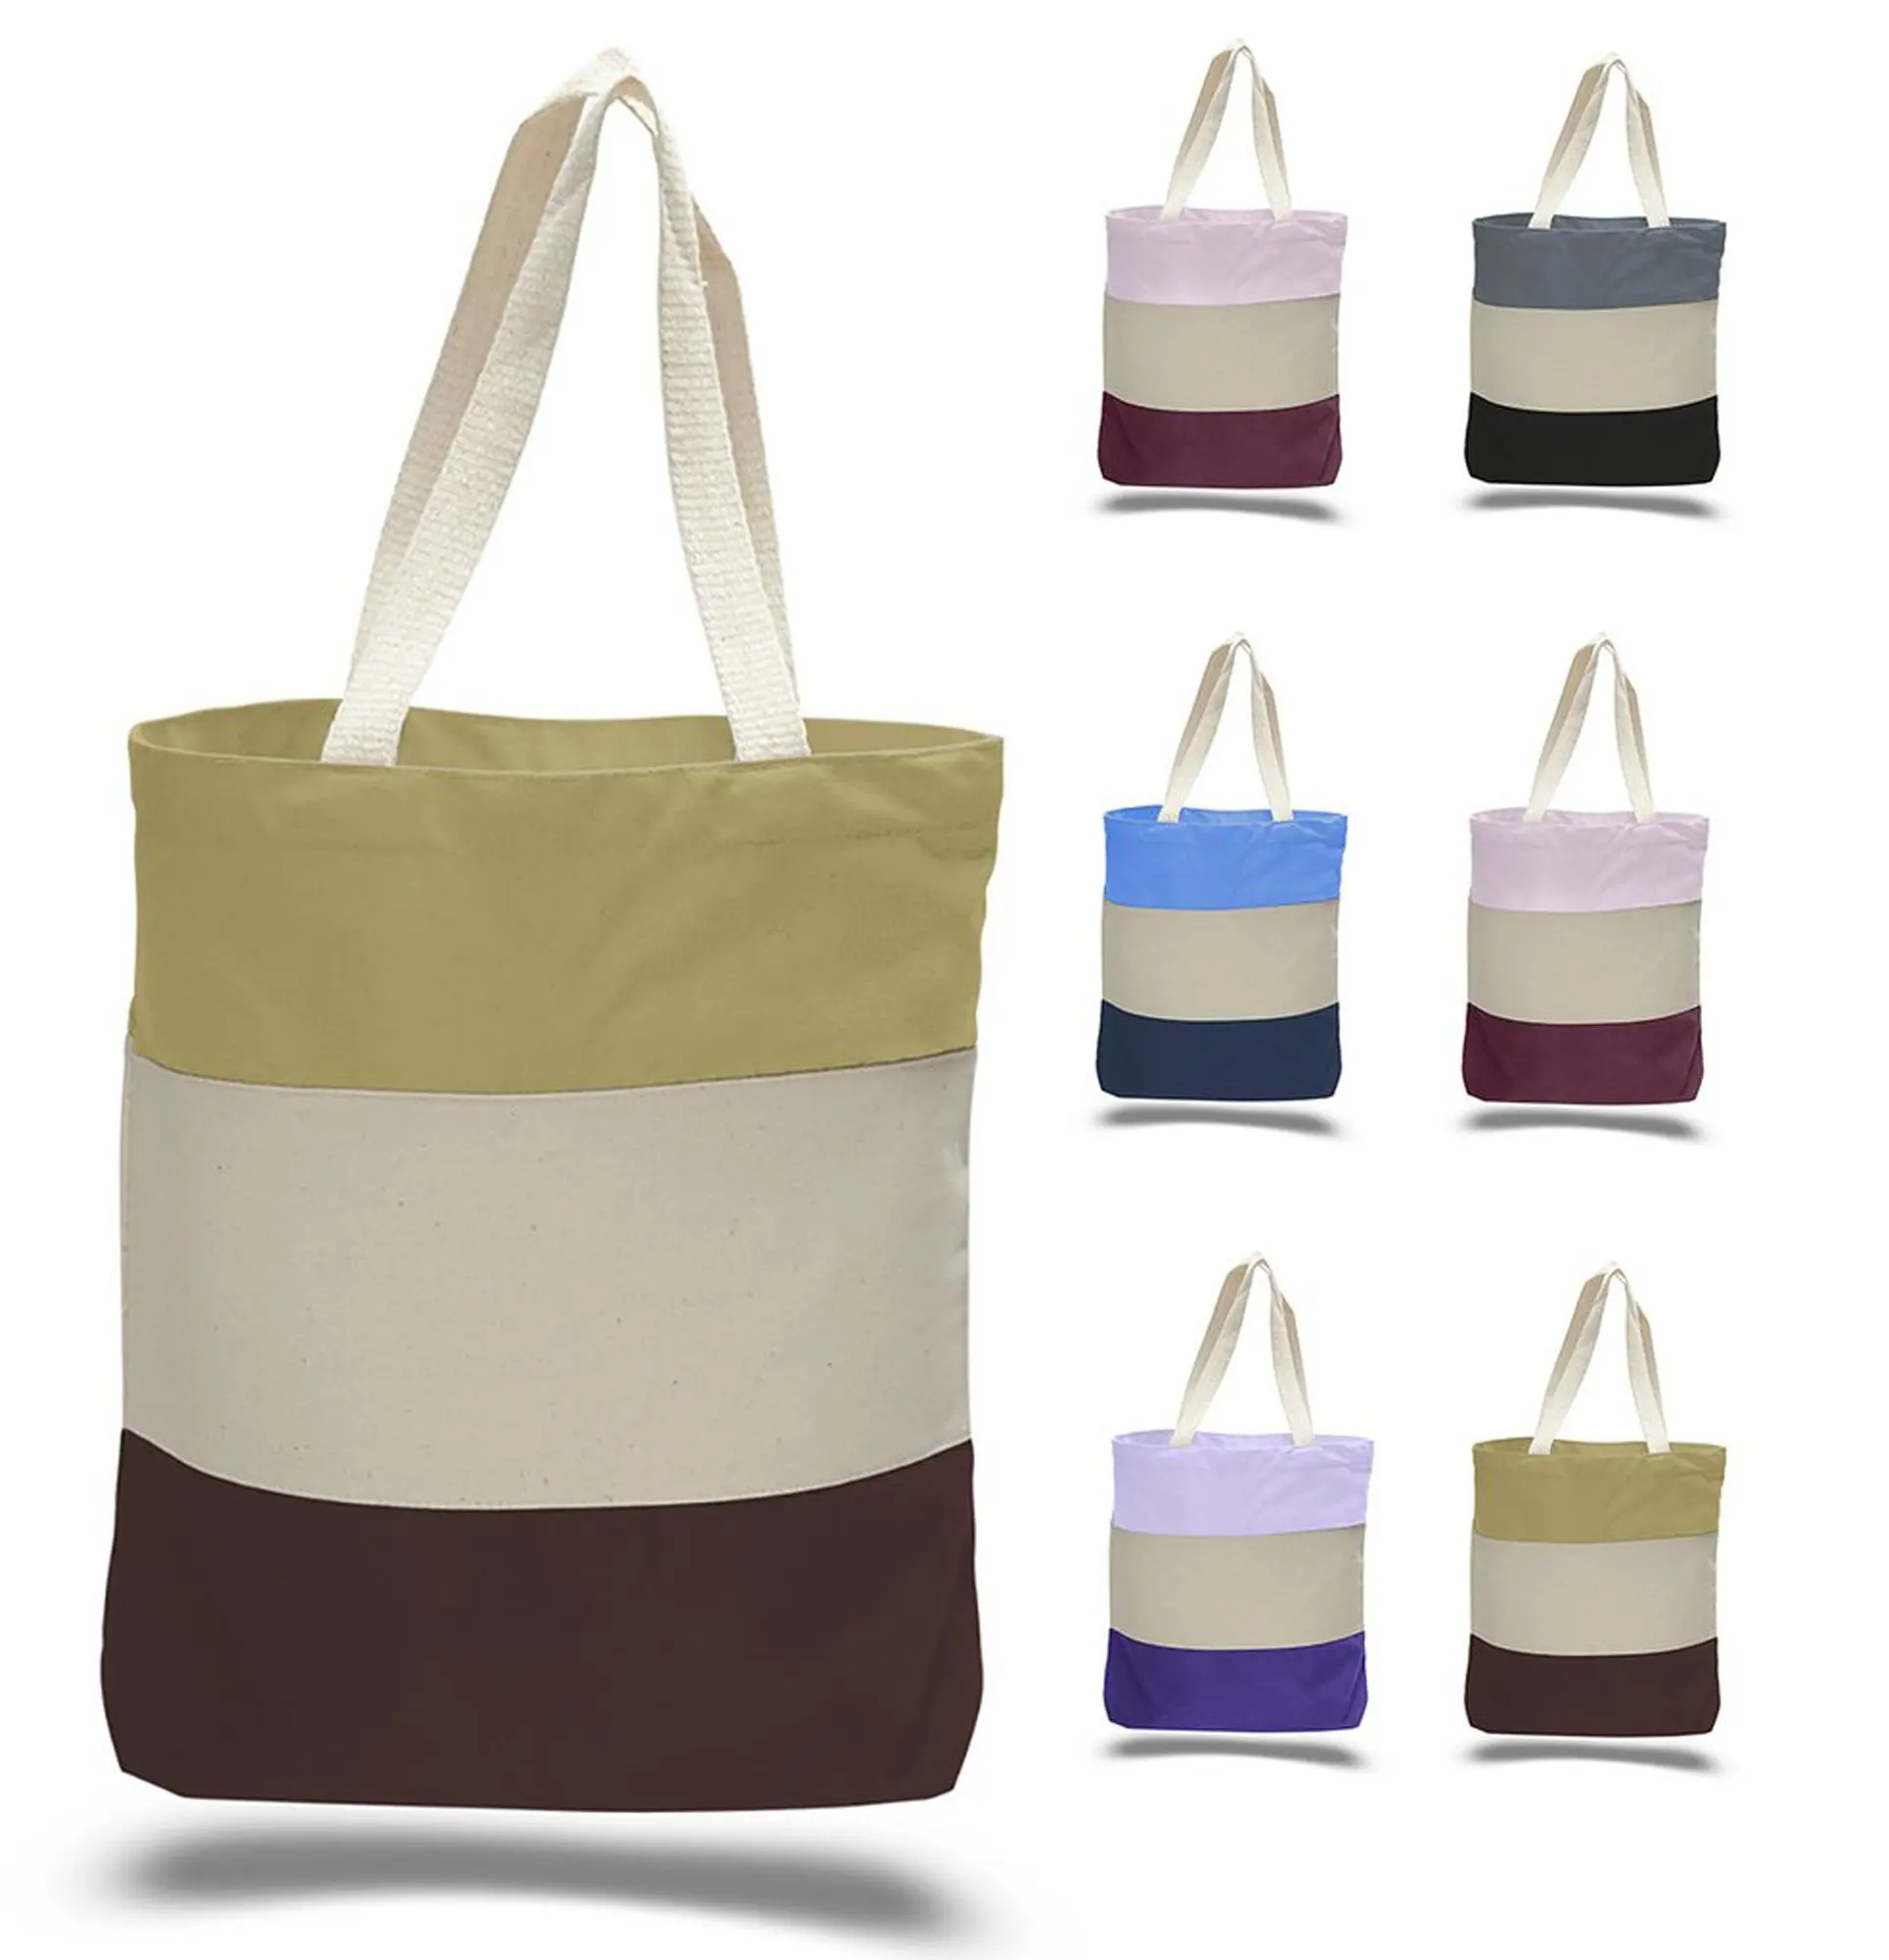 Cheap Plain Canvas Tote Bags, find Plain Canvas Tote Bags deals on line at 0